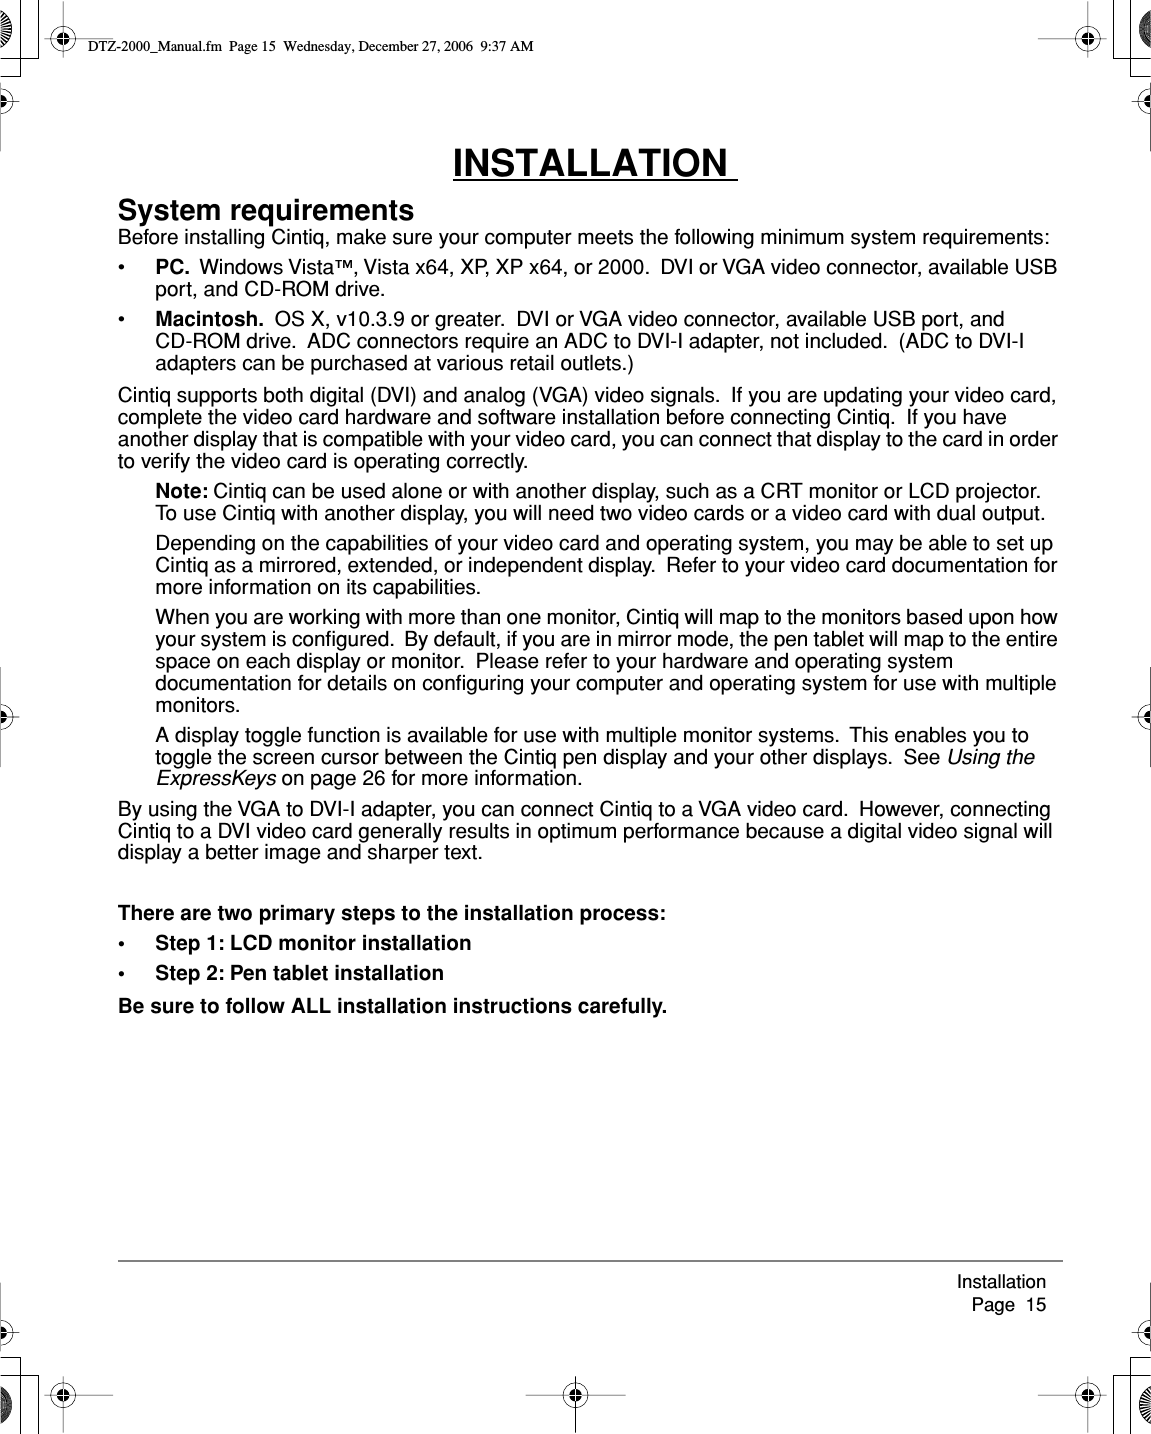 Installation     Page  15INSTALLATION System requirementsBefore installing Cintiq, make sure your computer meets the following minimum system requirements:•PC.  Windows Vista™, Vista x64, XP, XP x64, or 2000.  DVI or VGA video connector, available USB port, and CD-ROM drive.•Macintosh.  OS X, v10.3.9 or greater.  DVI or VGA video connector, available USB port, and CD-ROM drive.  ADC connectors require an ADC to DVI-I adapter, not included.  (ADC to DVI-I adapters can be purchased at various retail outlets.)Cintiq supports both digital (DVI) and analog (VGA) video signals.  If you are updating your video card, complete the video card hardware and software installation before connecting Cintiq.  If you have another display that is compatible with your video card, you can connect that display to the card in order to verify the video card is operating correctly.Note: Cintiq can be used alone or with another display, such as a CRT monitor or LCD projector.  To use Cintiq with another display, you will need two video cards or a video card with dual output.  Depending on the capabilities of your video card and operating system, you may be able to set up Cintiq as a mirrored, extended, or independent display.  Refer to your video card documentation for more information on its capabilities.When you are working with more than one monitor, Cintiq will map to the monitors based upon how your system is conﬁgured.  By default, if you are in mirror mode, the pen tablet will map to the entire space on each display or monitor.  Please refer to your hardware and operating system documentation for details on conﬁguring your computer and operating system for use with multiple monitors.A display toggle function is available for use with multiple monitor systems.  This enables you to toggle the screen cursor between the Cintiq pen display and your other displays.  See Using the ExpressKeys on page 26 for more information.By using the VGA to DVI-I adapter, you can connect Cintiq to a VGA video card.  However, connecting Cintiq to a DVI video card generally results in optimum performance because a digital video signal will display a better image and sharper text.There are two primary steps to the installation process:• Step 1: LCD monitor installation• Step 2: Pen tablet installationBe sure to follow ALL installation instructions carefully.DTZ-2000_Manual.fm  Page 15  Wednesday, December 27, 2006  9:37 AM